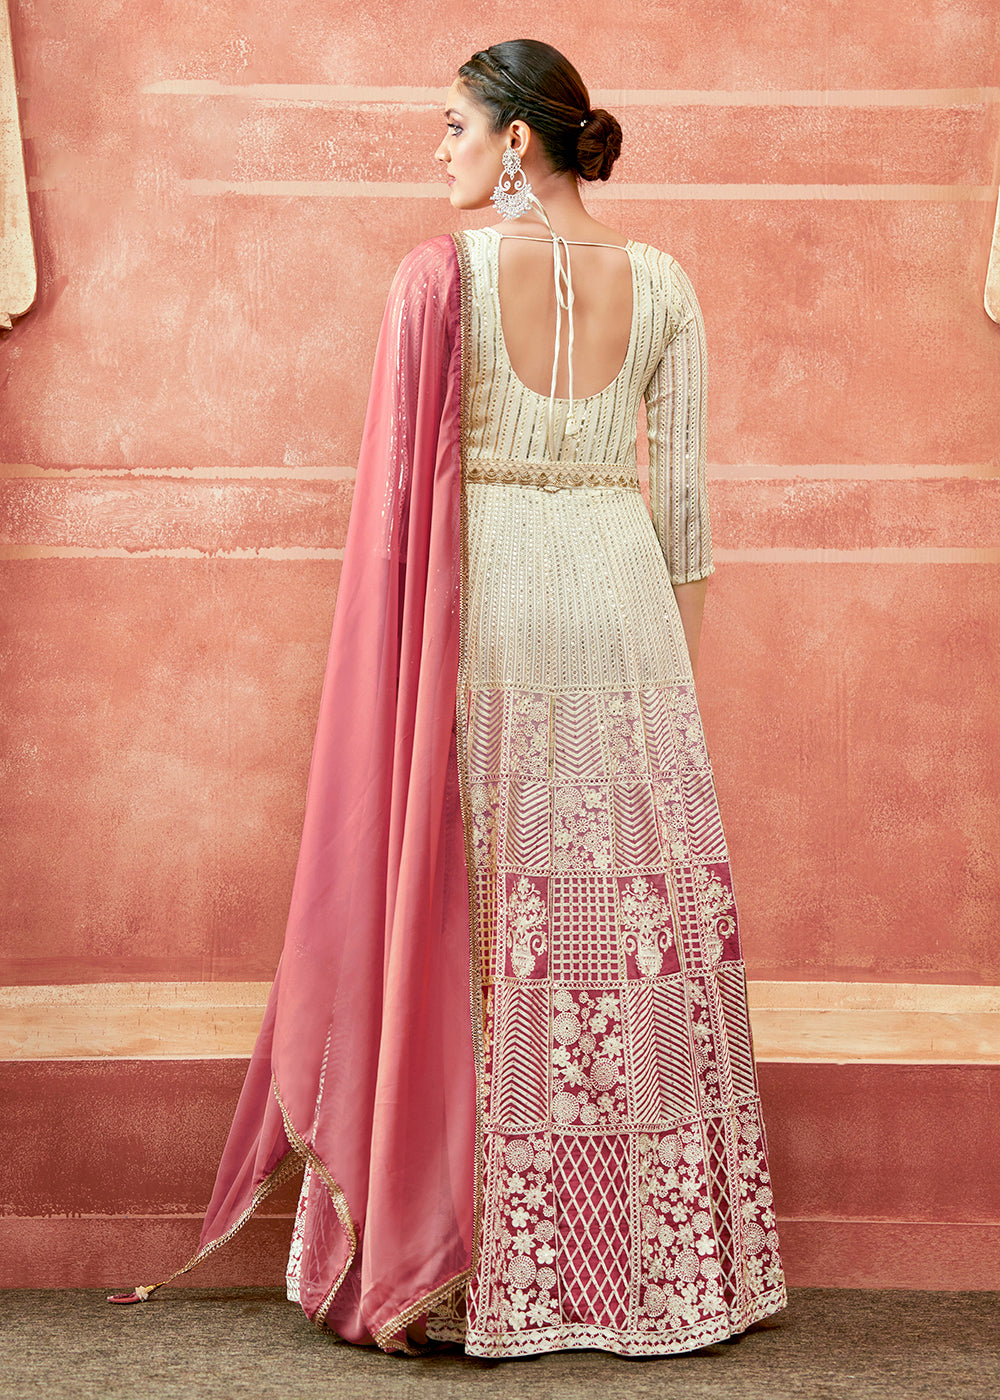 Buy Now Off White & Pink Georgette Embroidered Festive Anarkali Suit Online in USA, UK, Australia, New Zealand, Canada & Worldwide at Empress Clothing. 